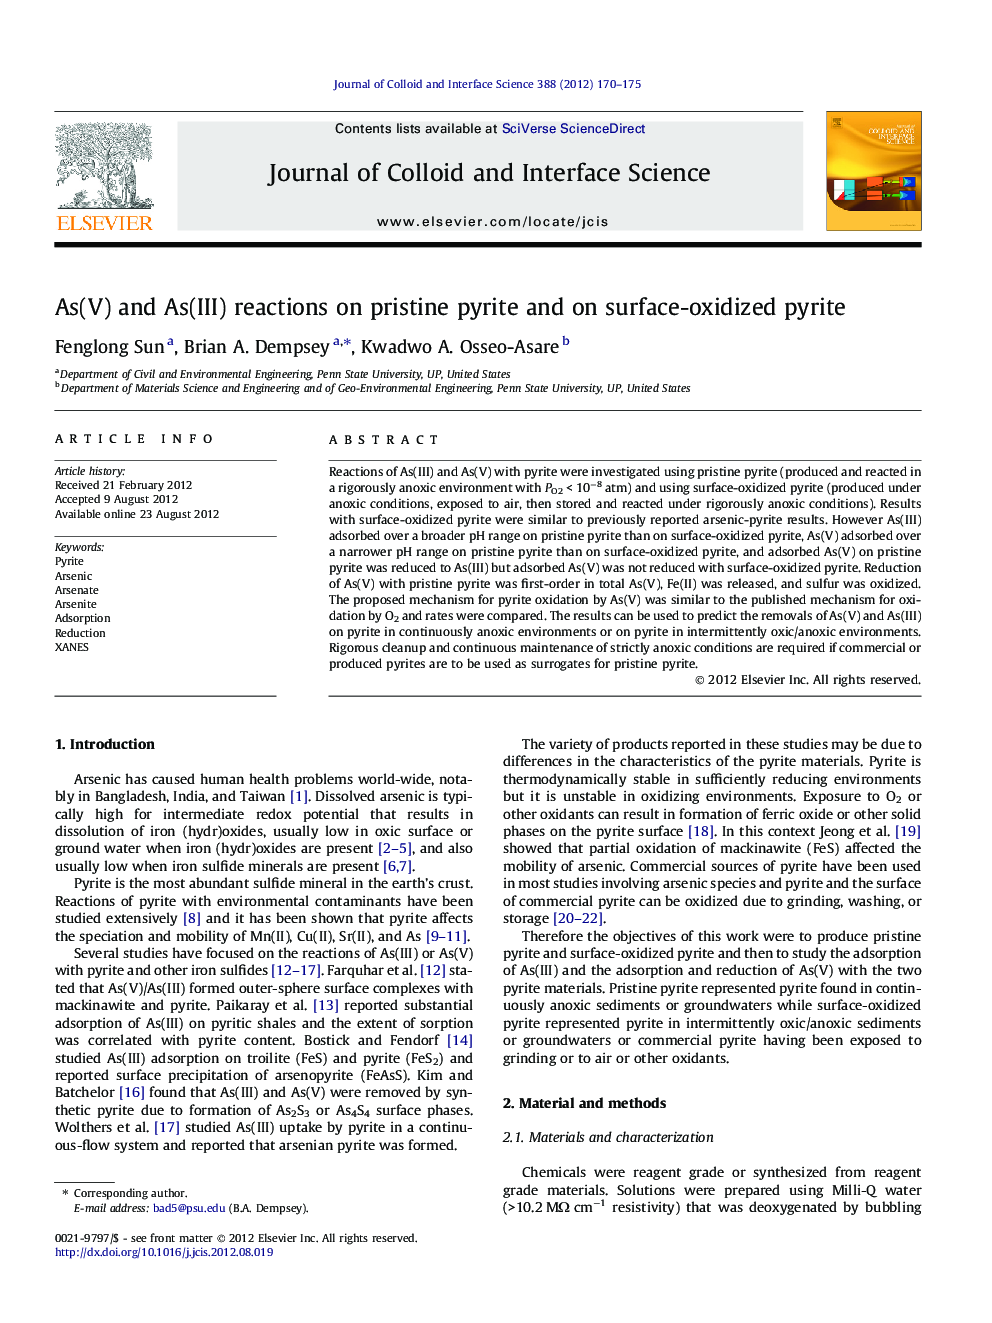 As(V) and As(III) reactions on pristine pyrite and on surface-oxidized pyrite